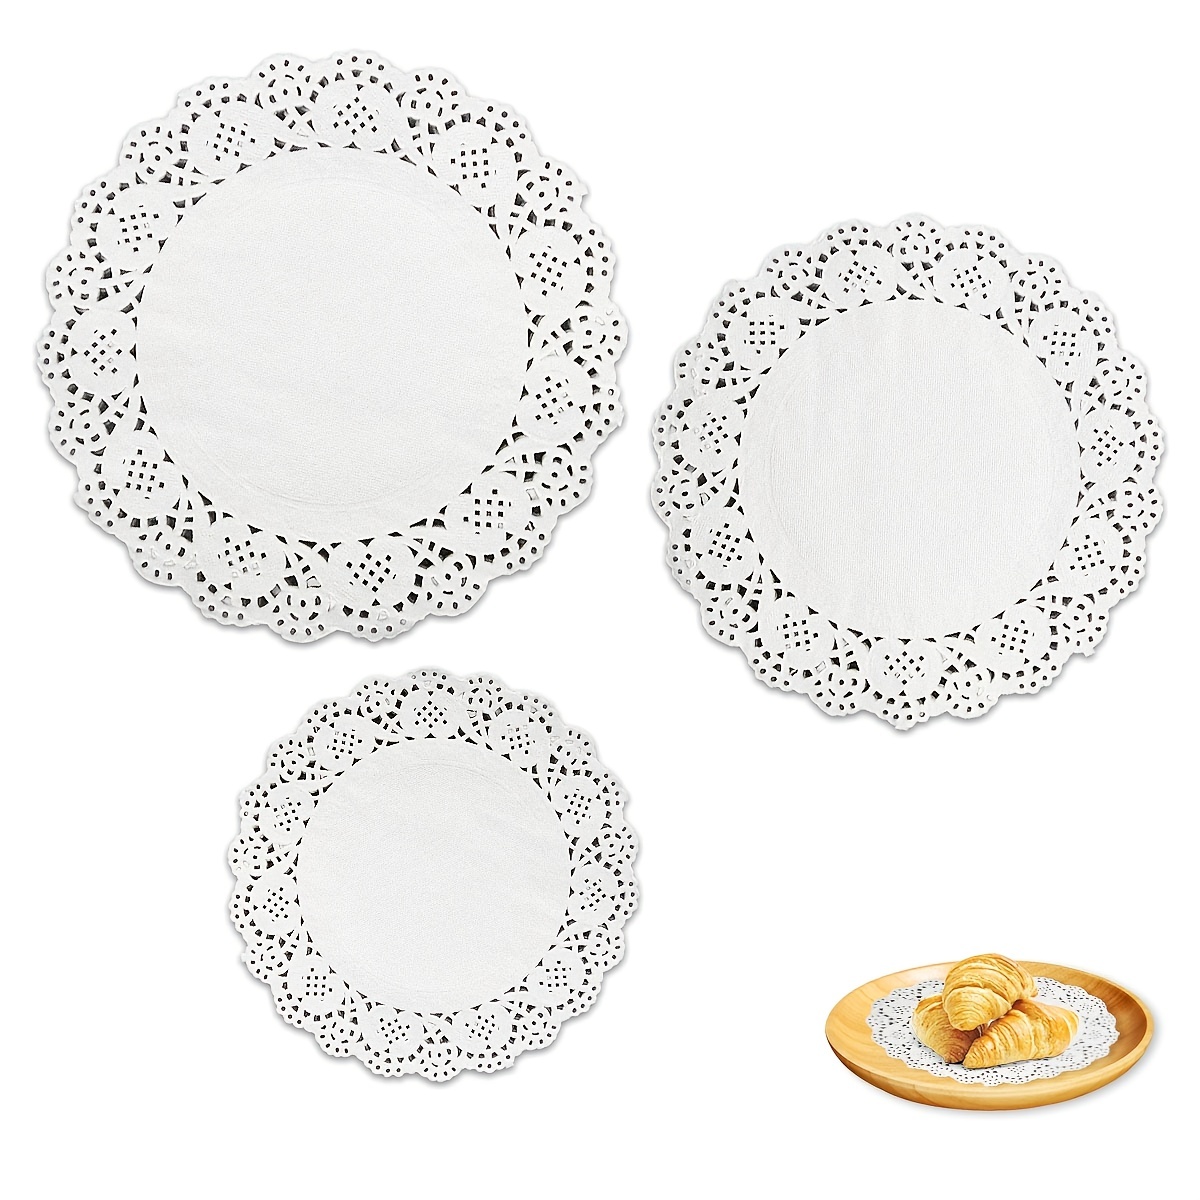 6.5inch White Paper Doilies Party Wedding Christmas Table Cake Pad